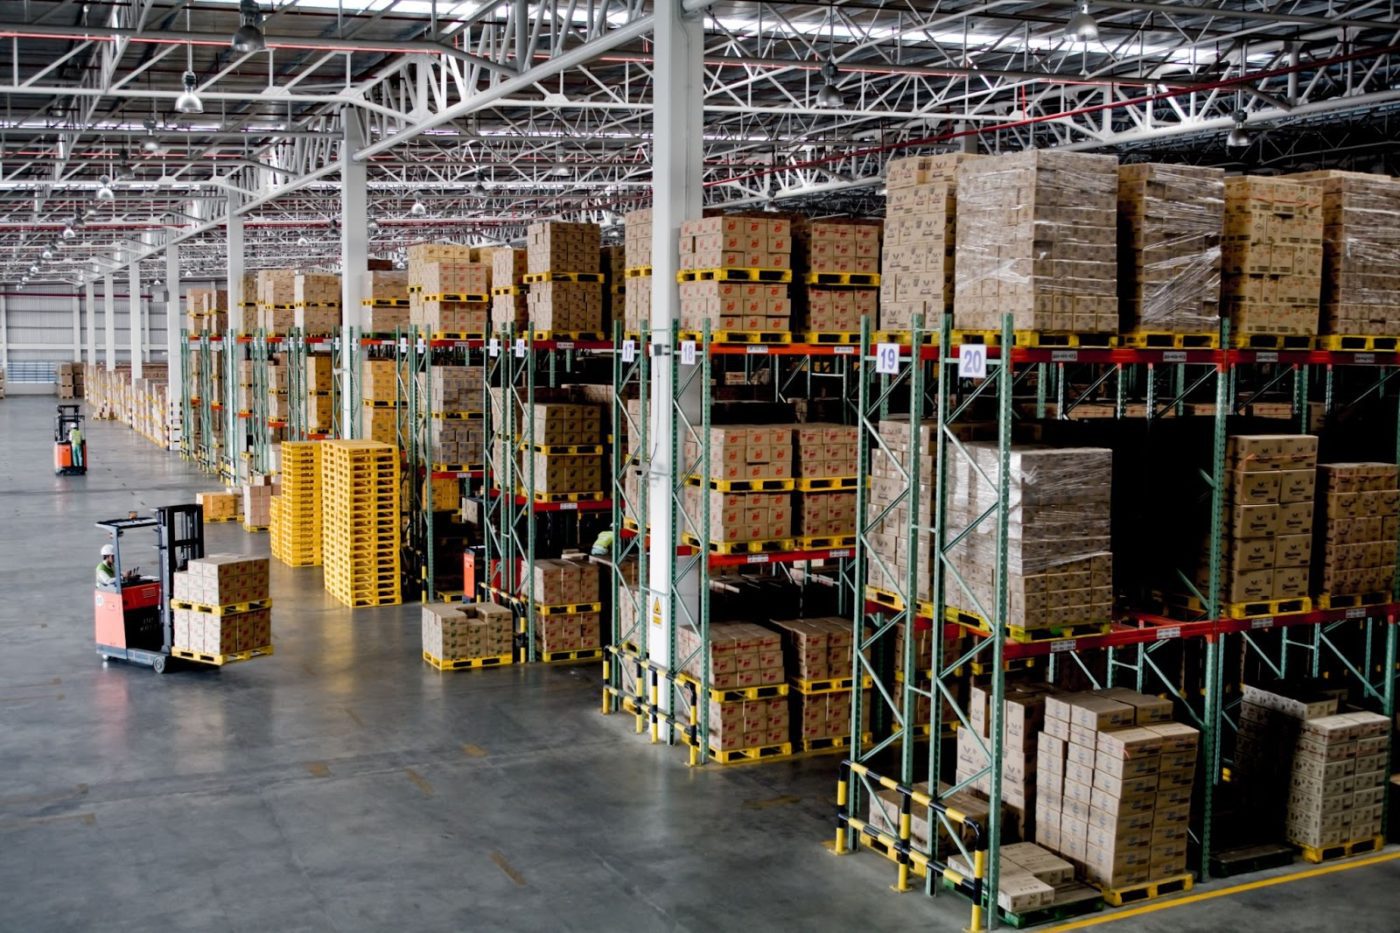 Warehouse: Like-new returned & quality used products